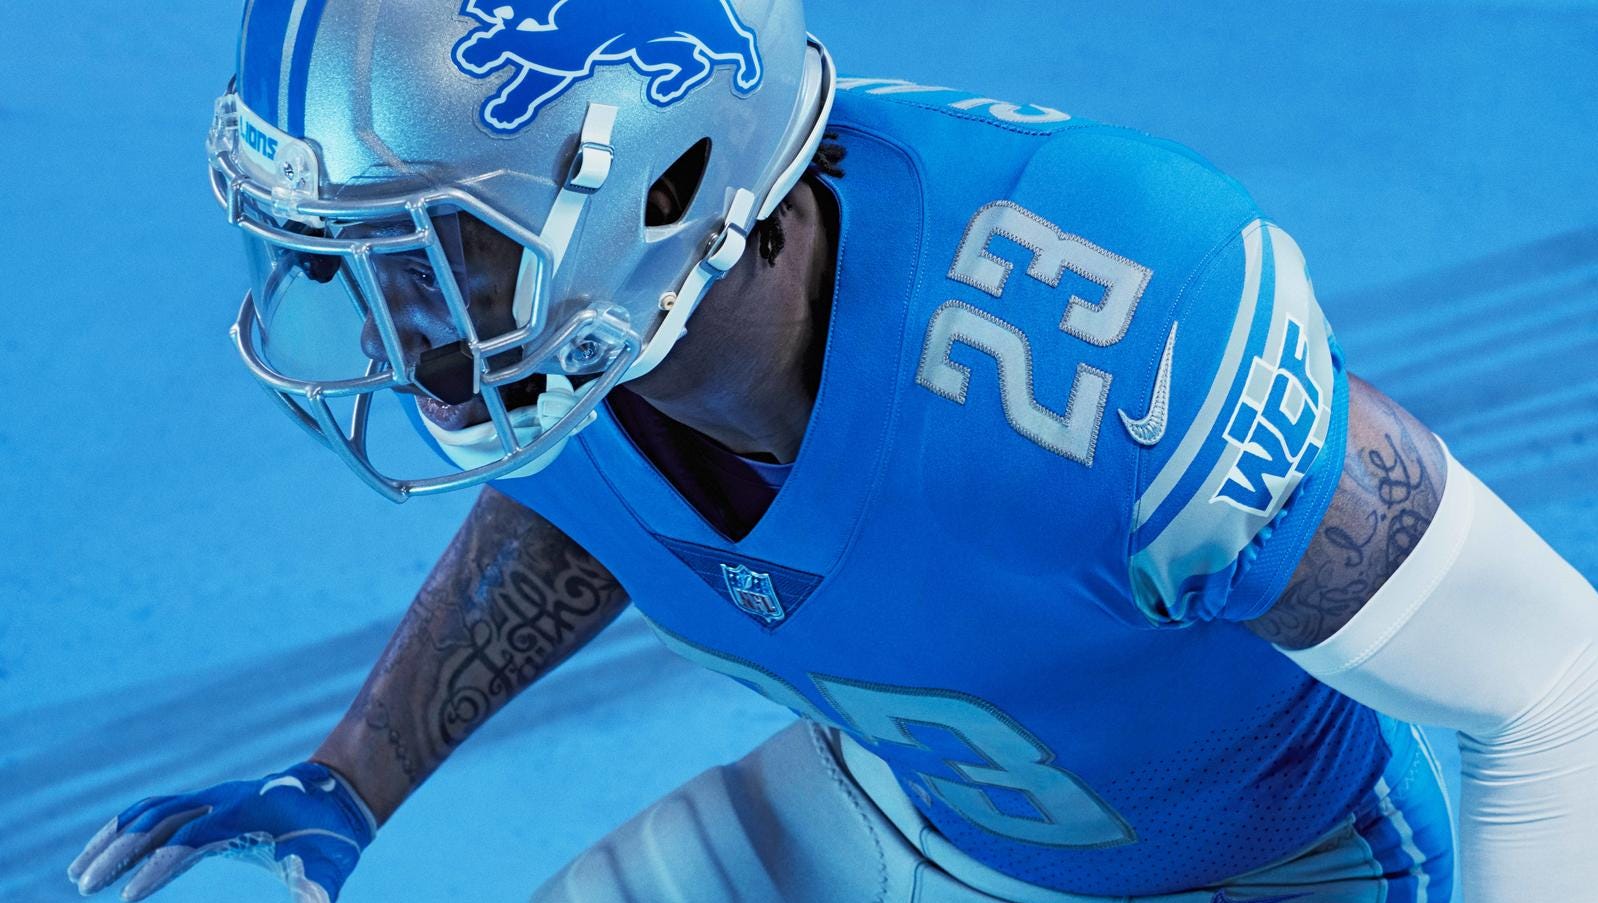 lions color rush jersey